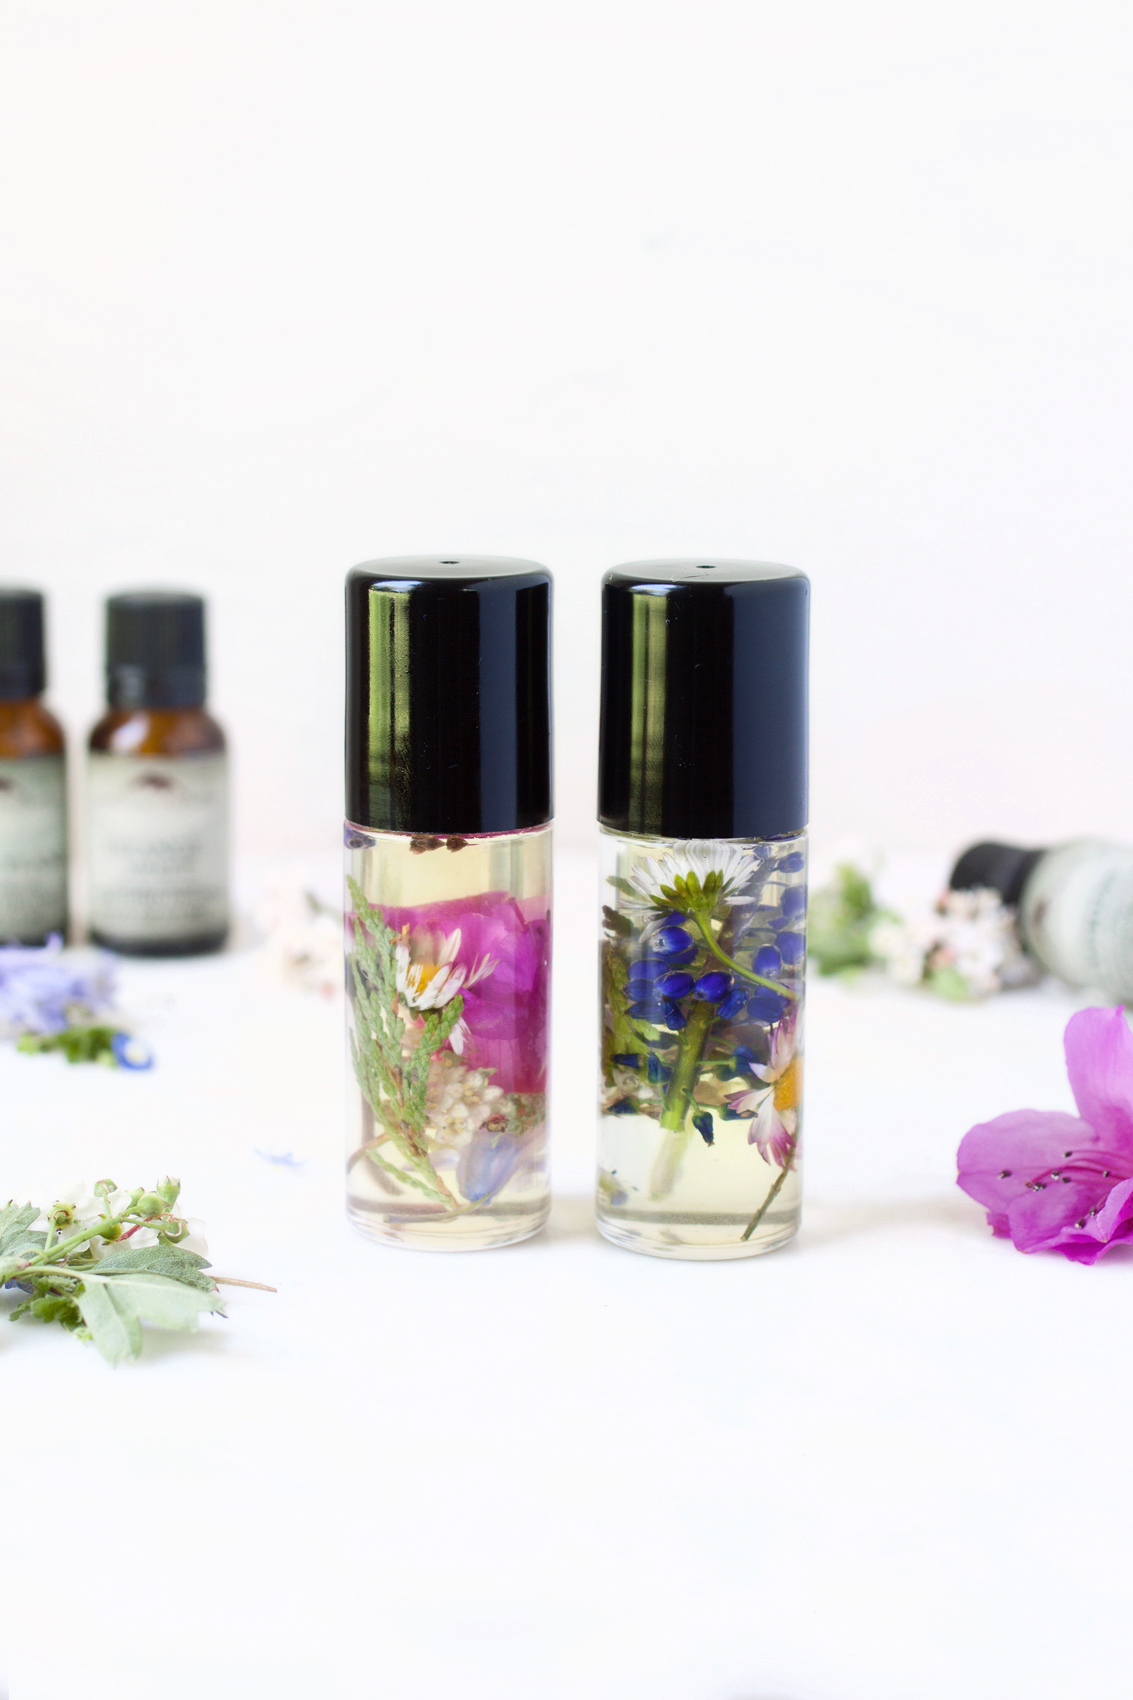 Picture Of diy perfume roll on with wildflowers inside  1